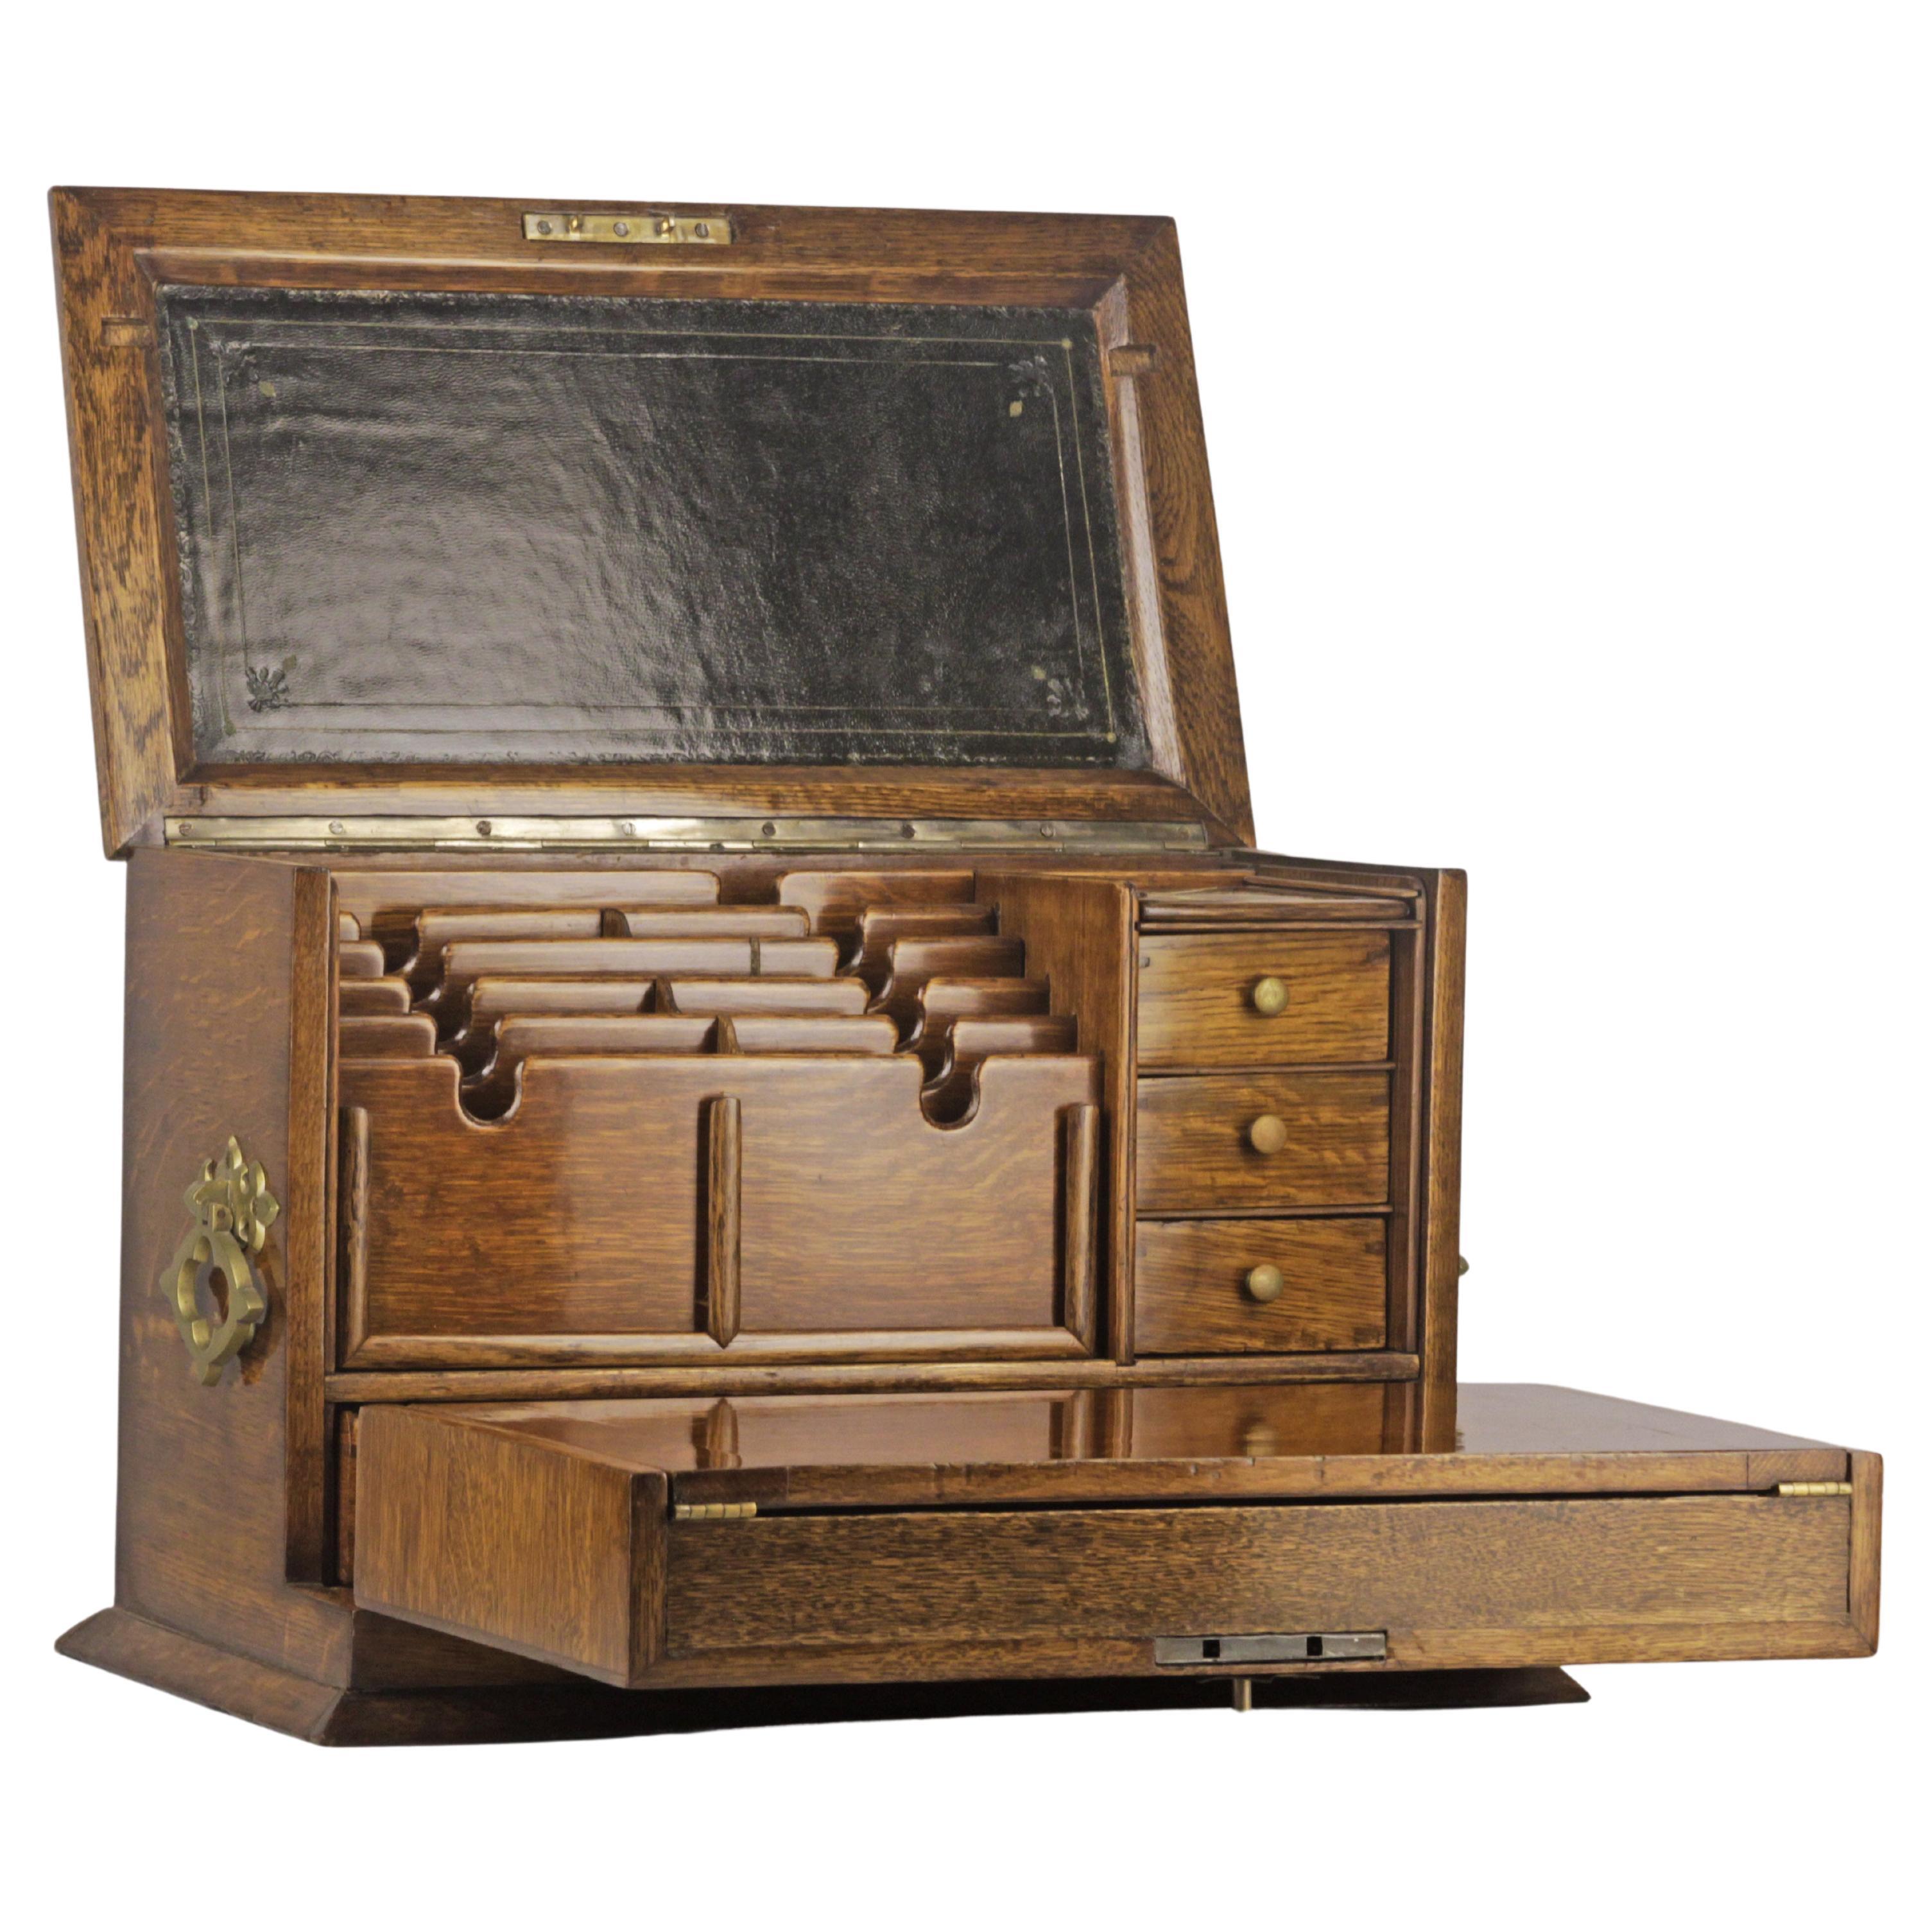 English Notary Desk in Oak, Travel Mail /Correspondence Box